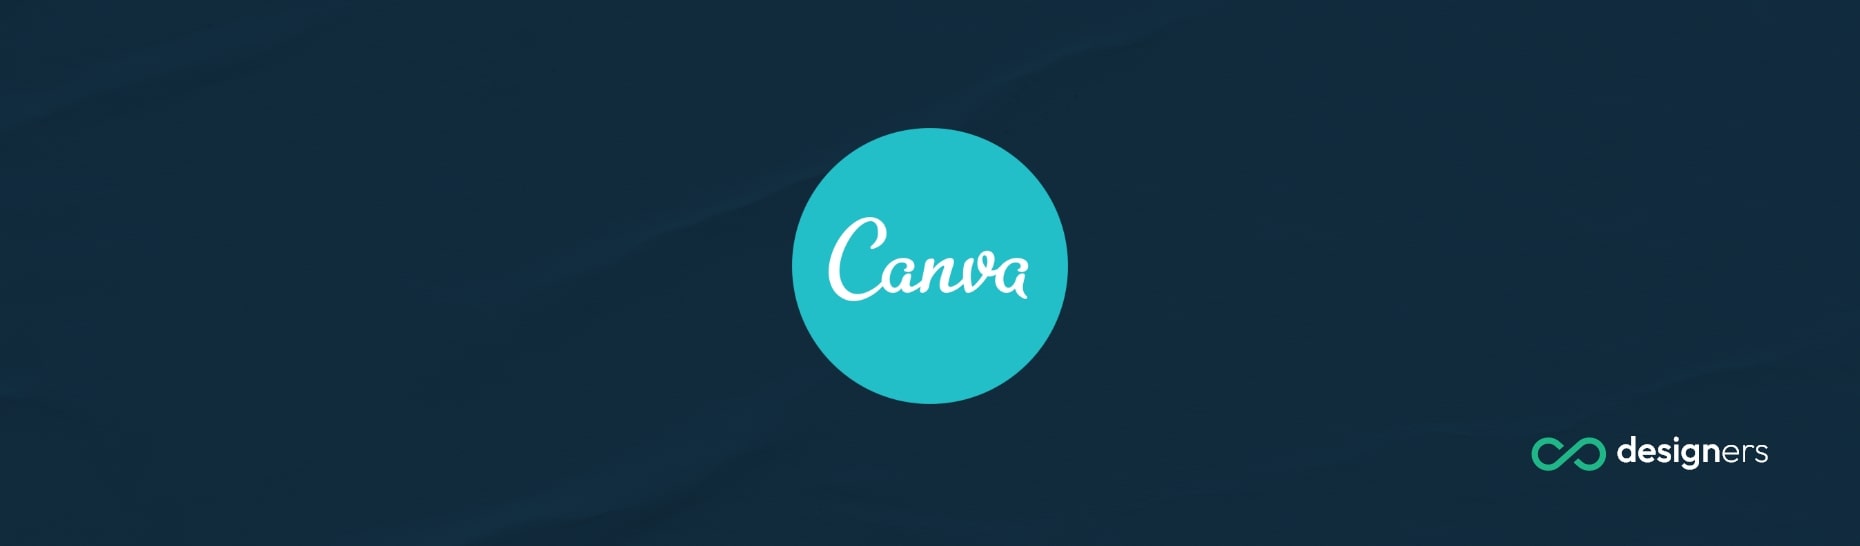 Where Does Canva Print From?